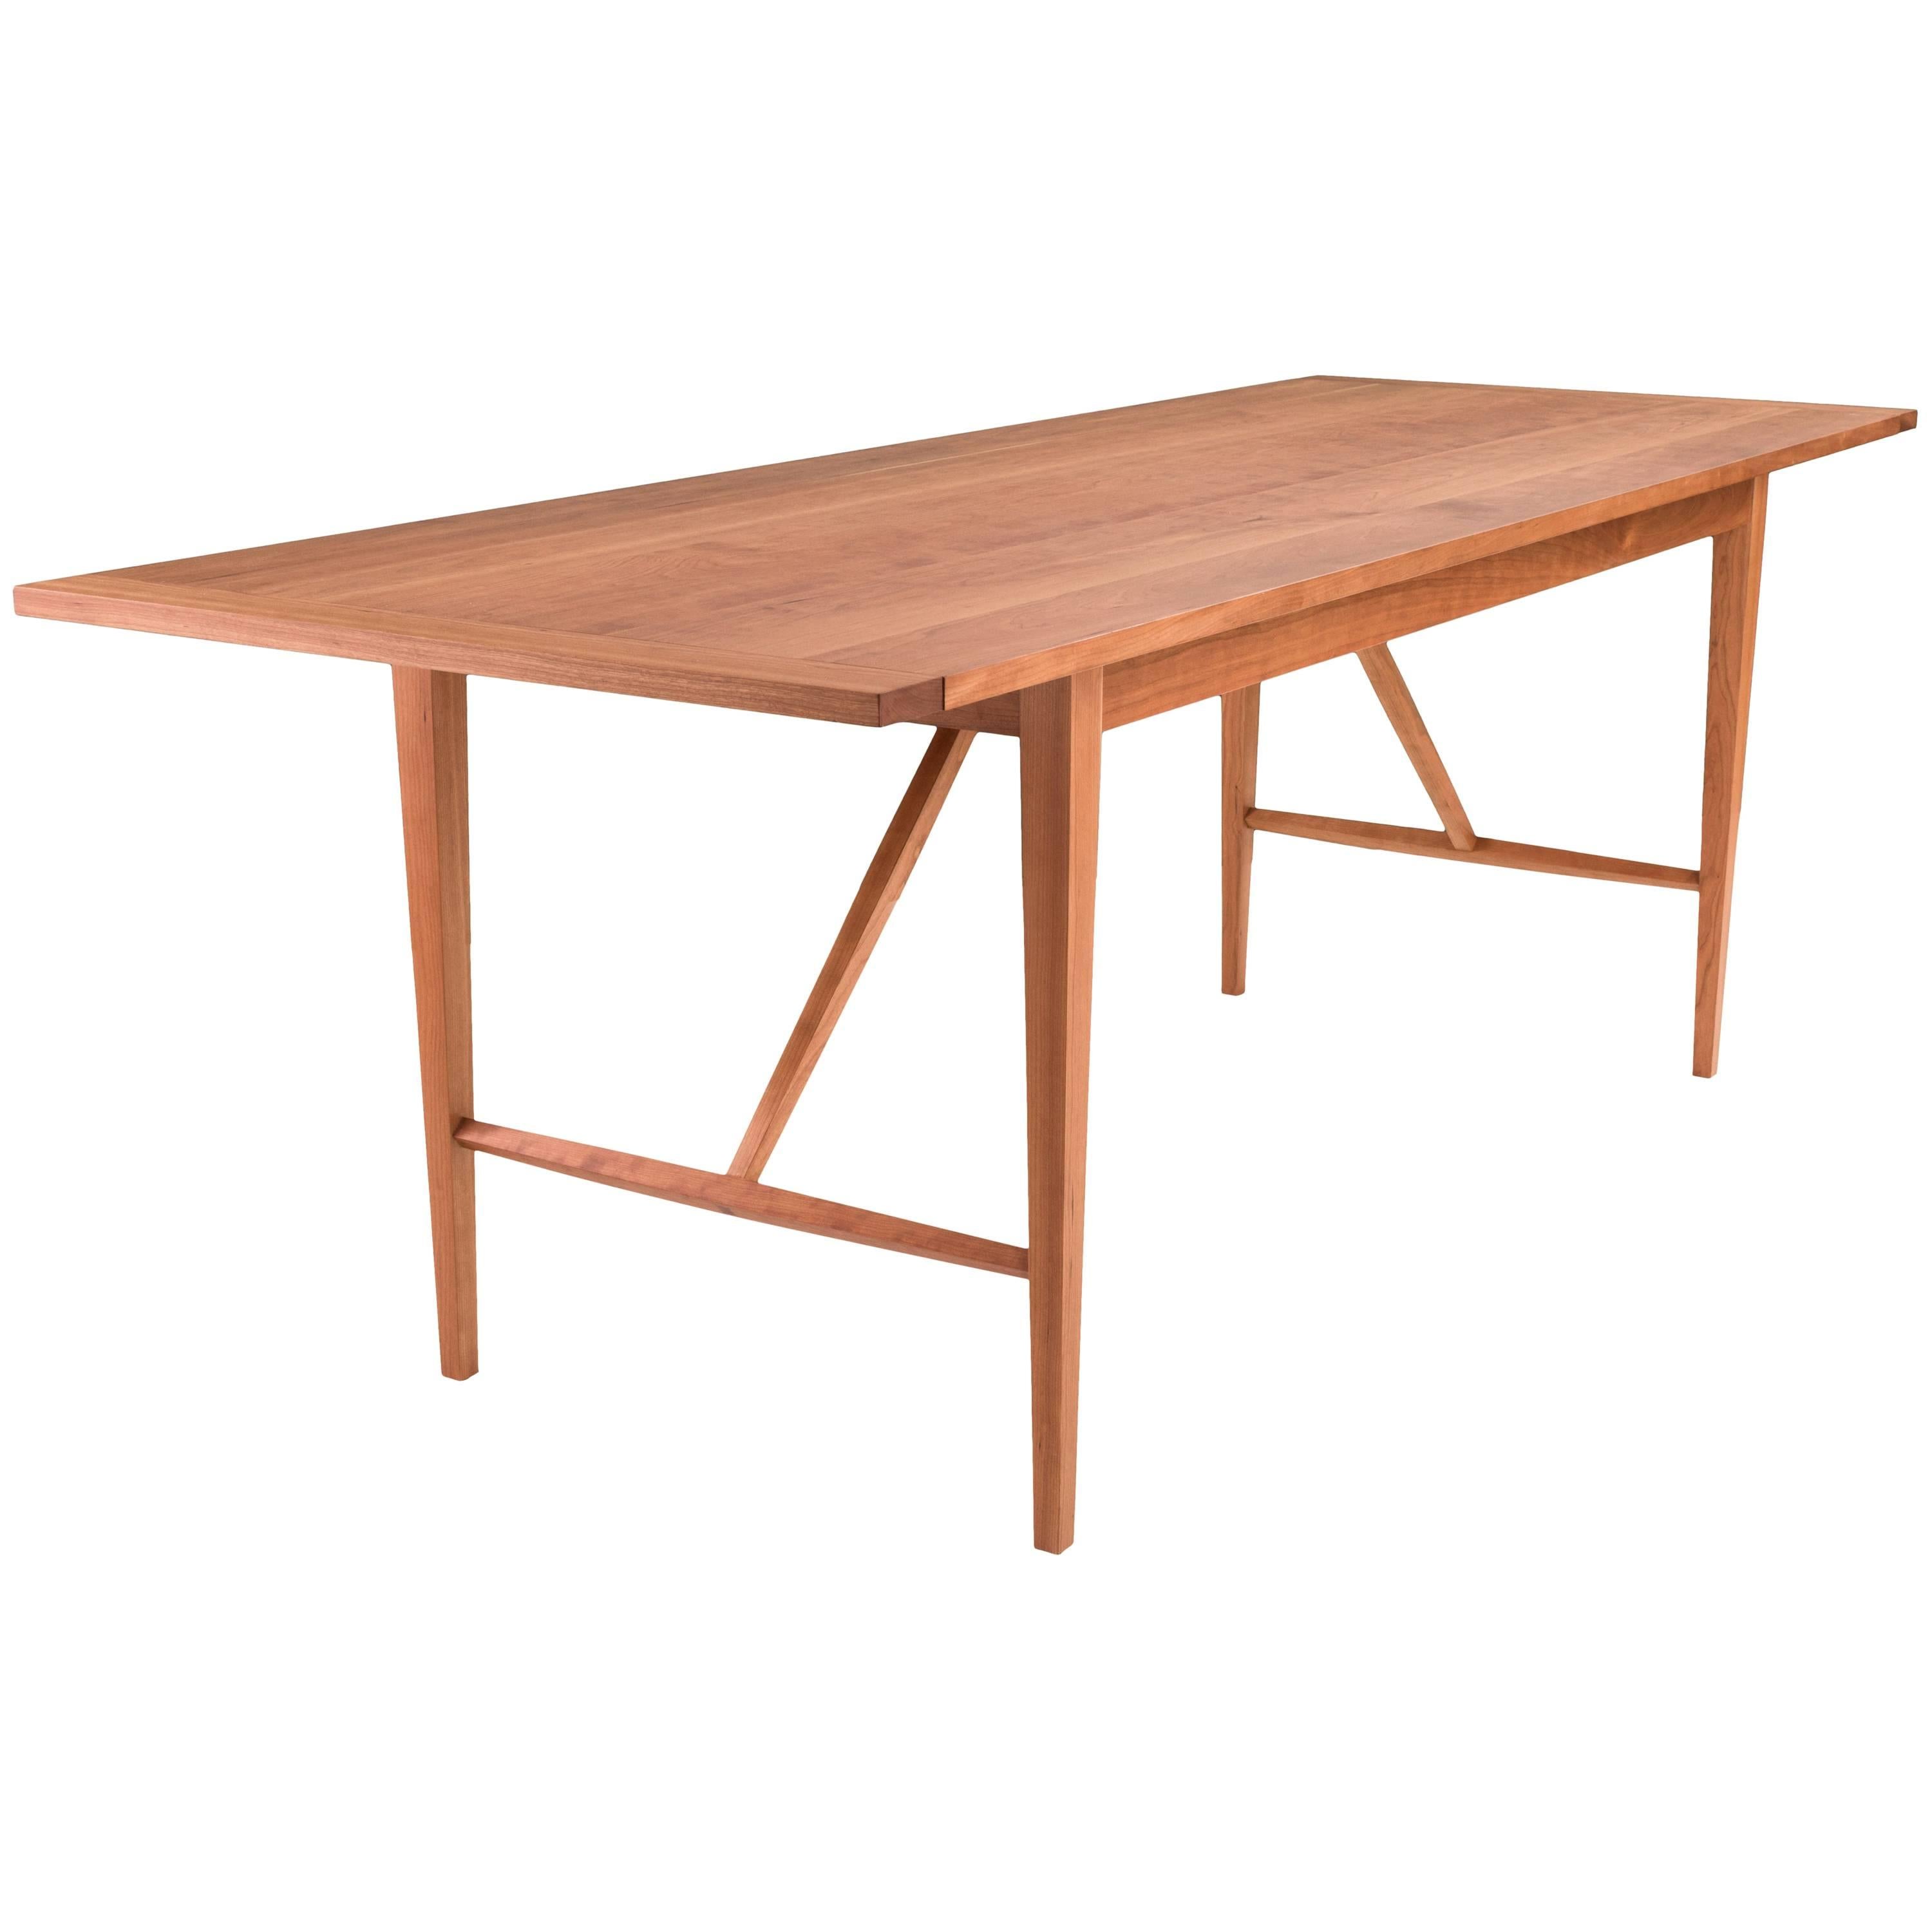 Hill Dining Table by Tretiak Works, Handcrafted Solid Cherry Shaker For Sale